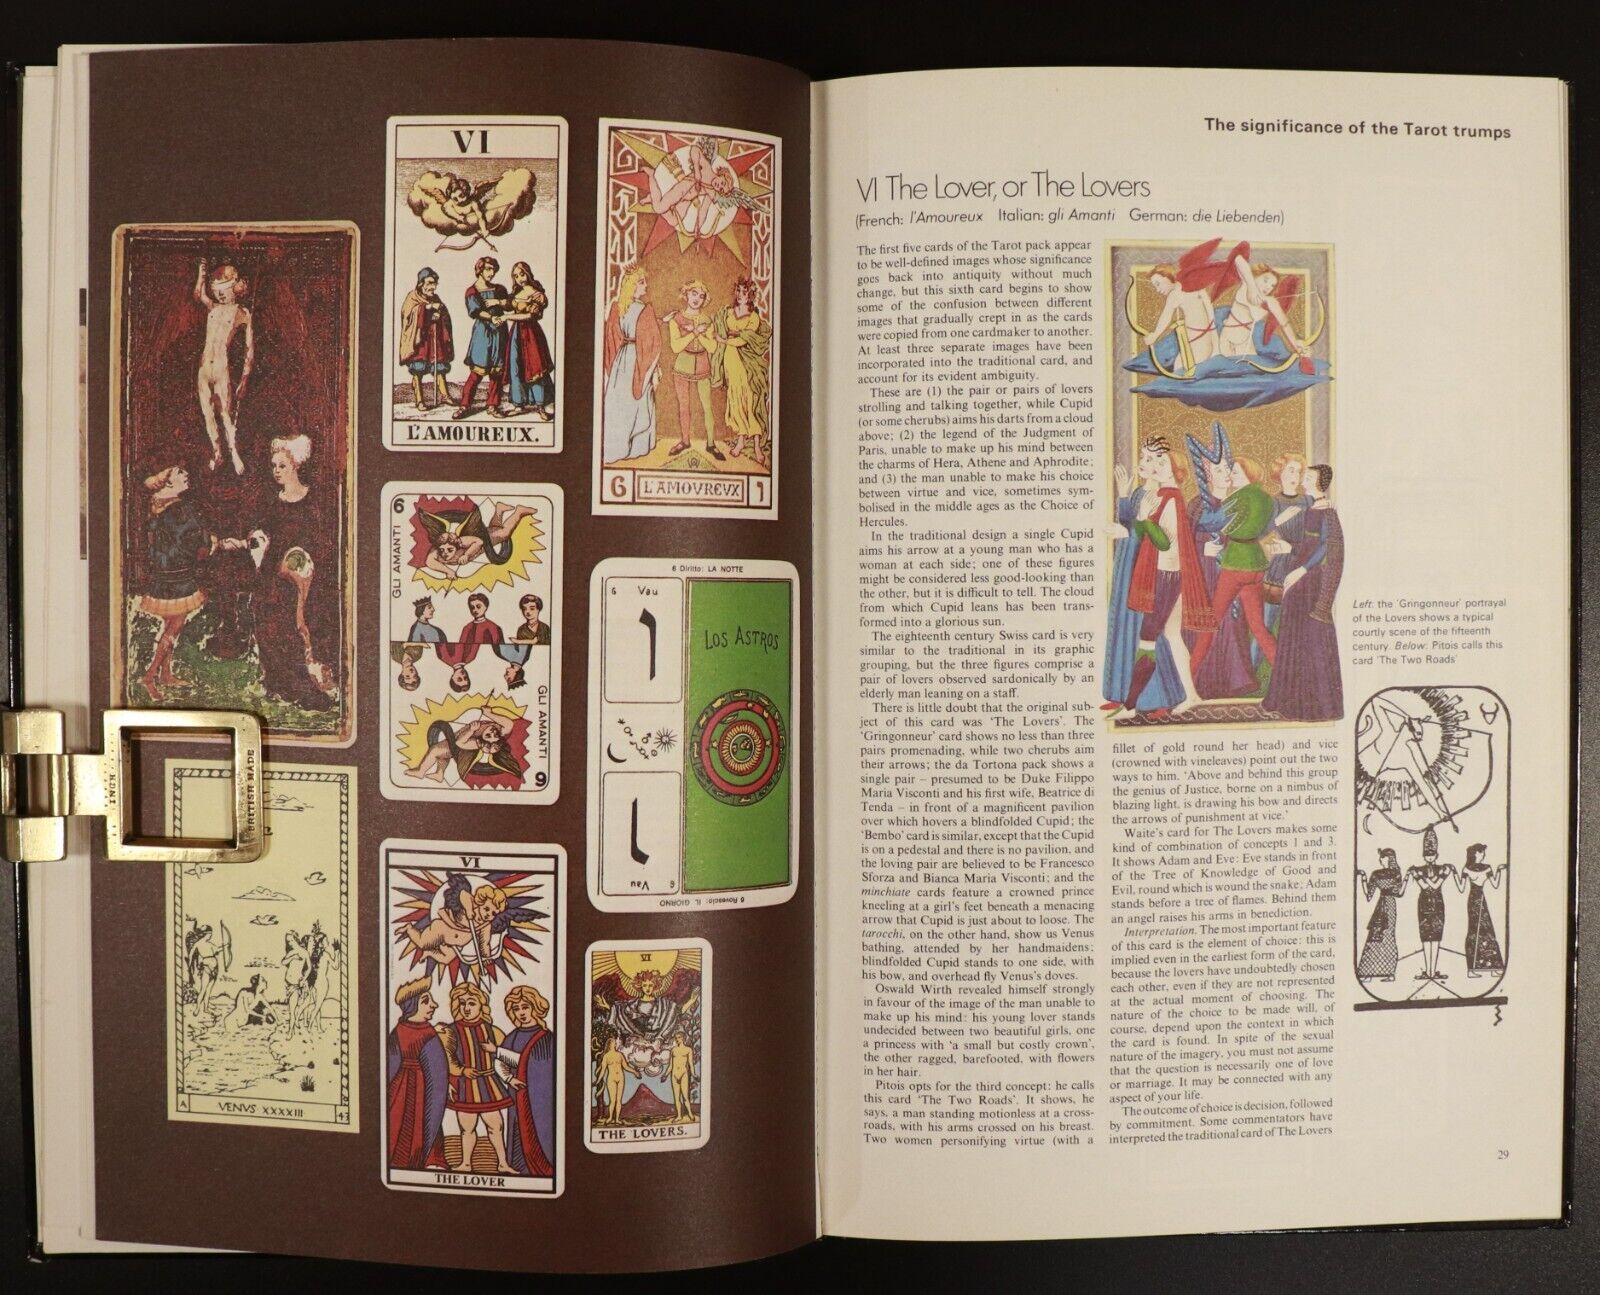 1987 The Tarot How To Interpret The Cards Occult Book Oracles Tarot Cards